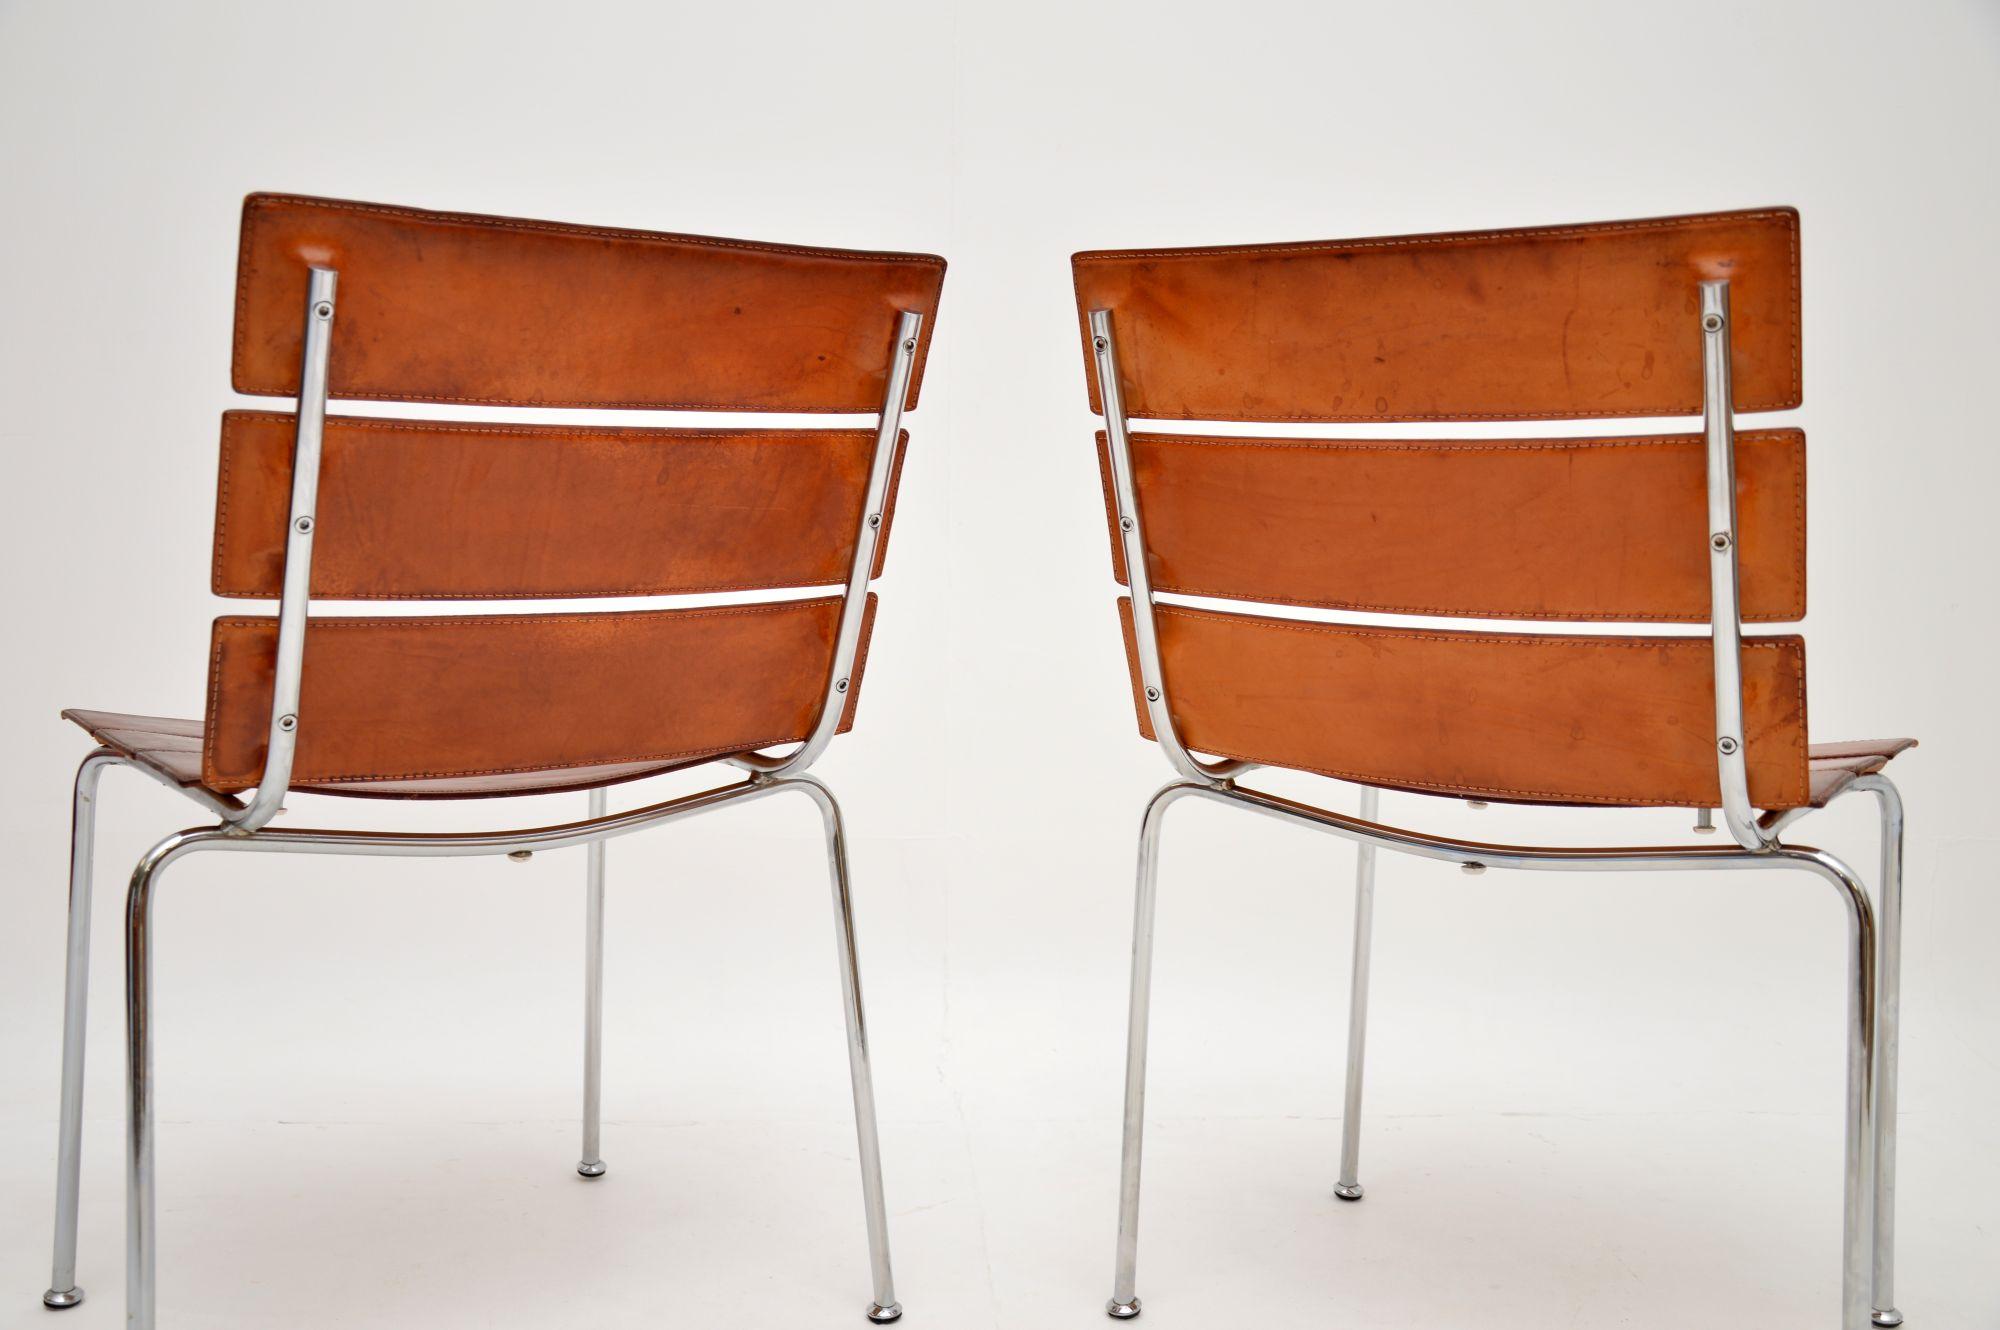 1970’s Pair of Vintage Italian Leather & Chrome ‘Stripe’ Chairs by Giancarlo Veg For Sale 4